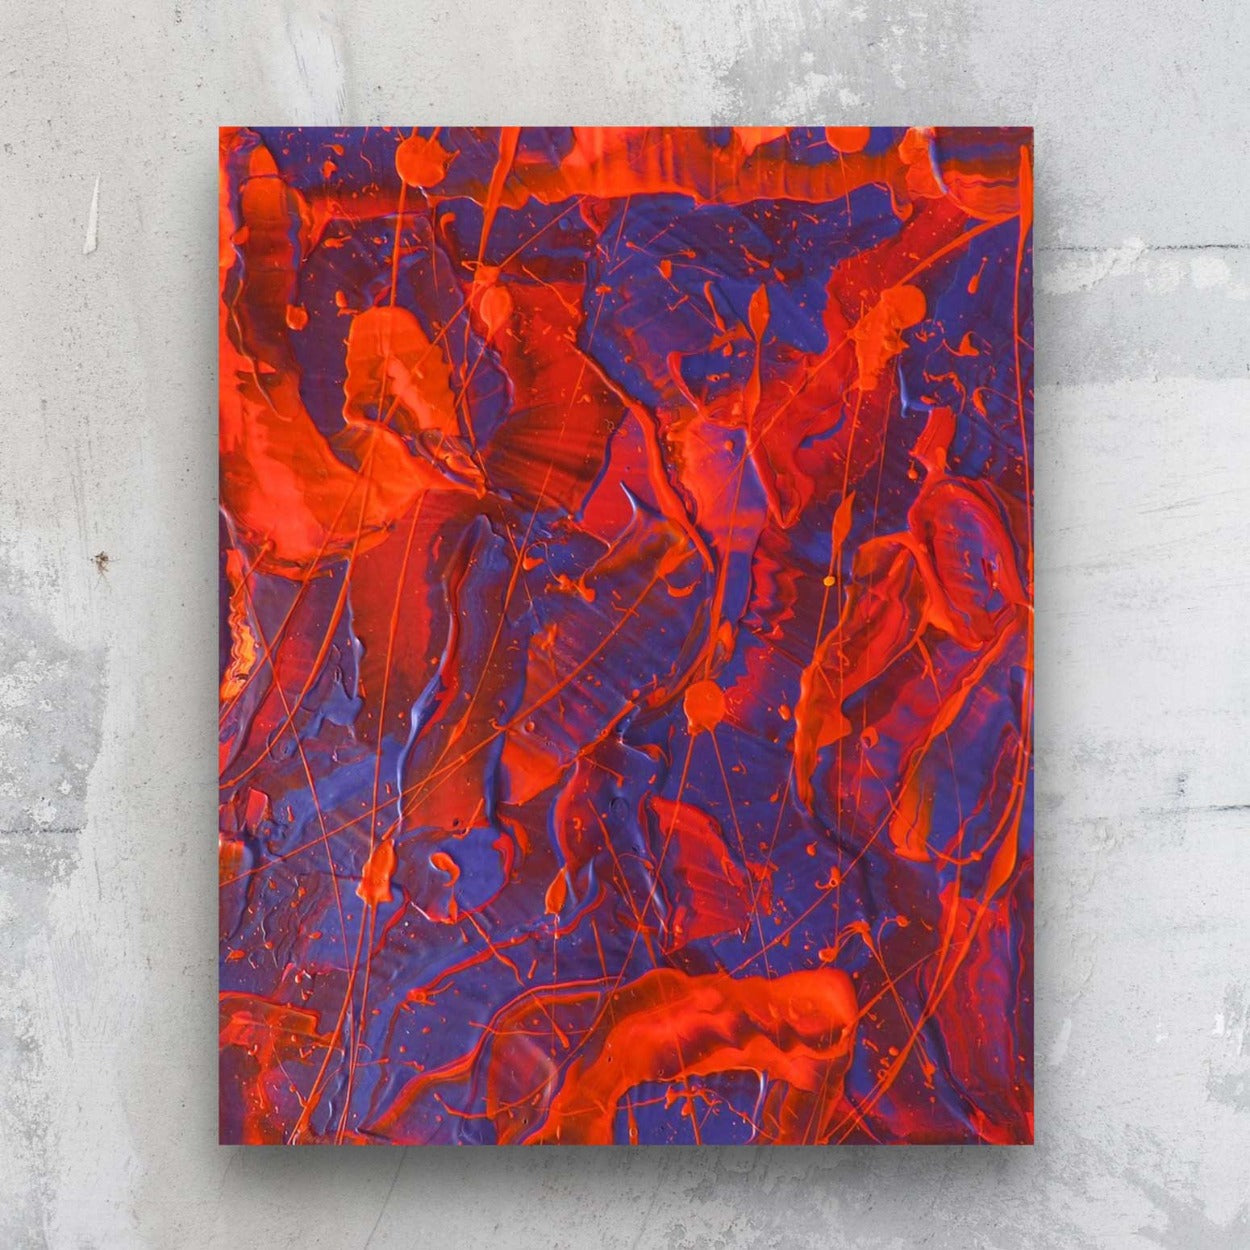 Little Luxuries VI, bold original abstract painting  on paper by Bridget Bradley in reds and electric blues, seen against a stone wall in situ